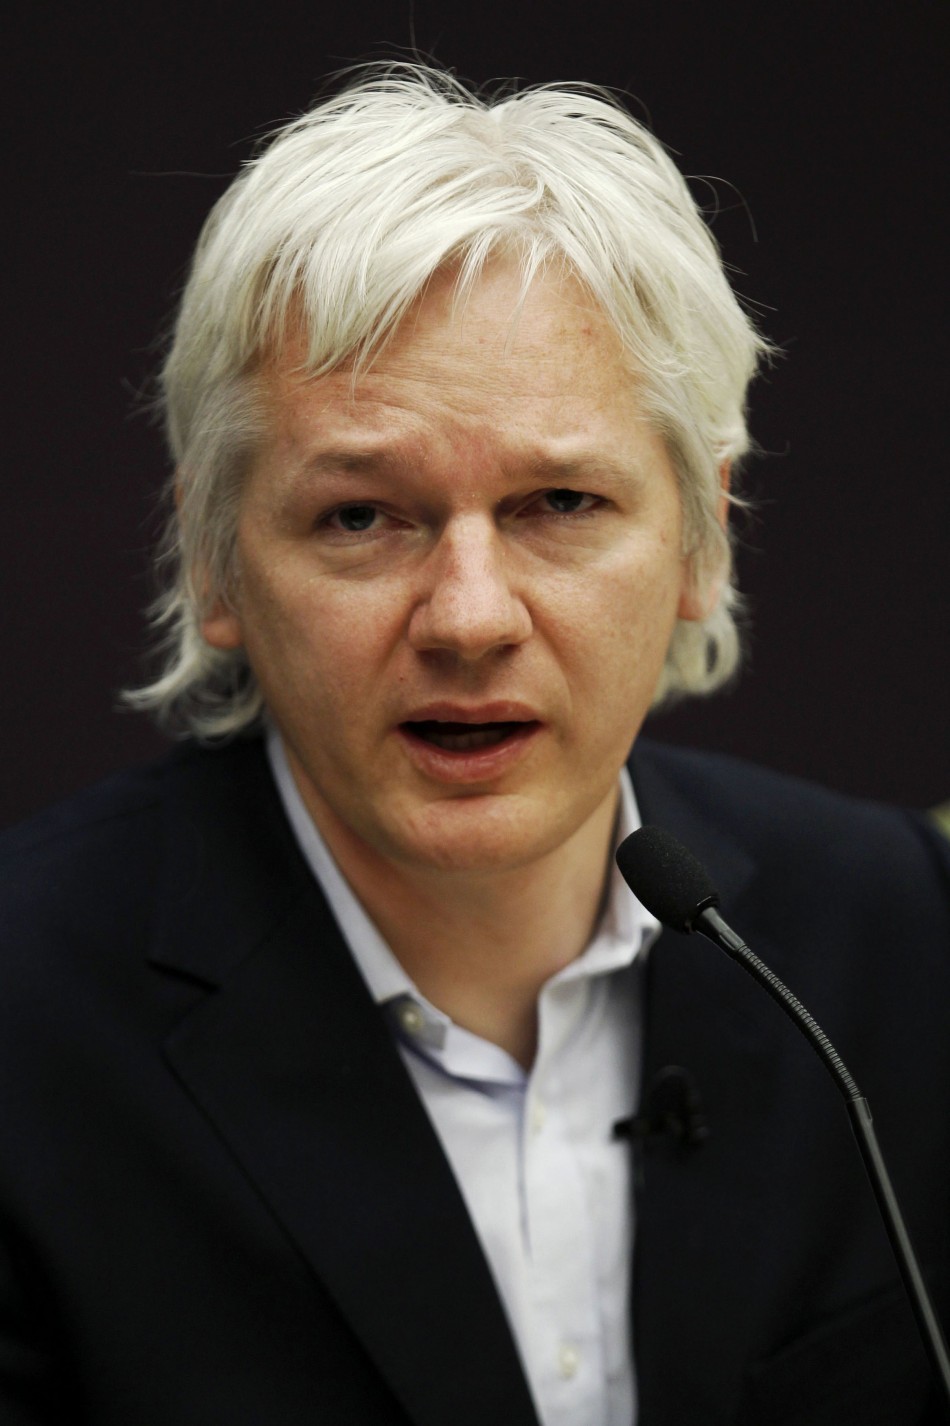 Julian Assange to Surrender? Fast Declining Health May 